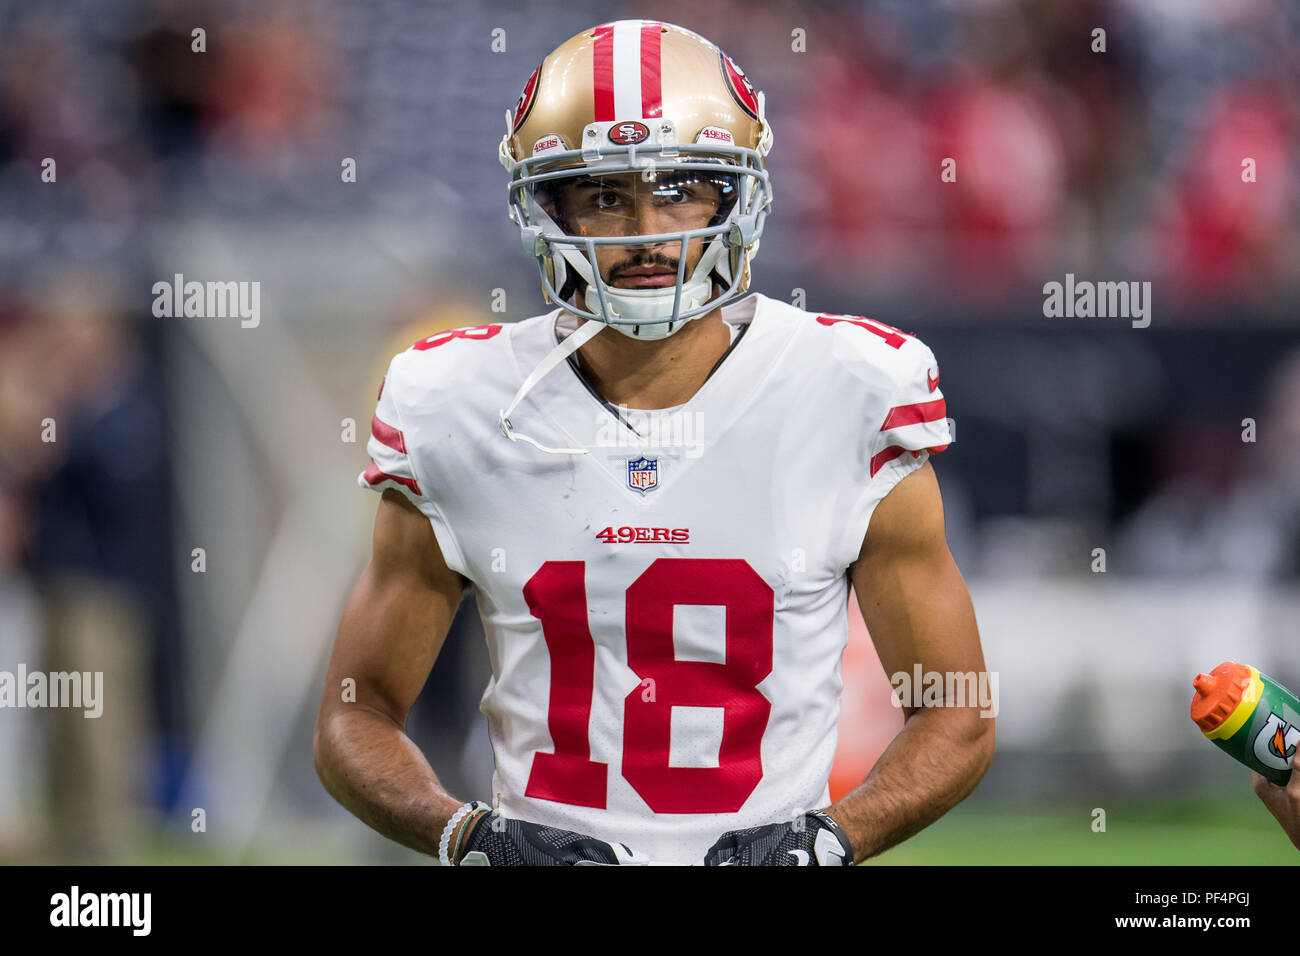 Houston, USA. 18 August 2018. San Francisco 49ers wide receiver